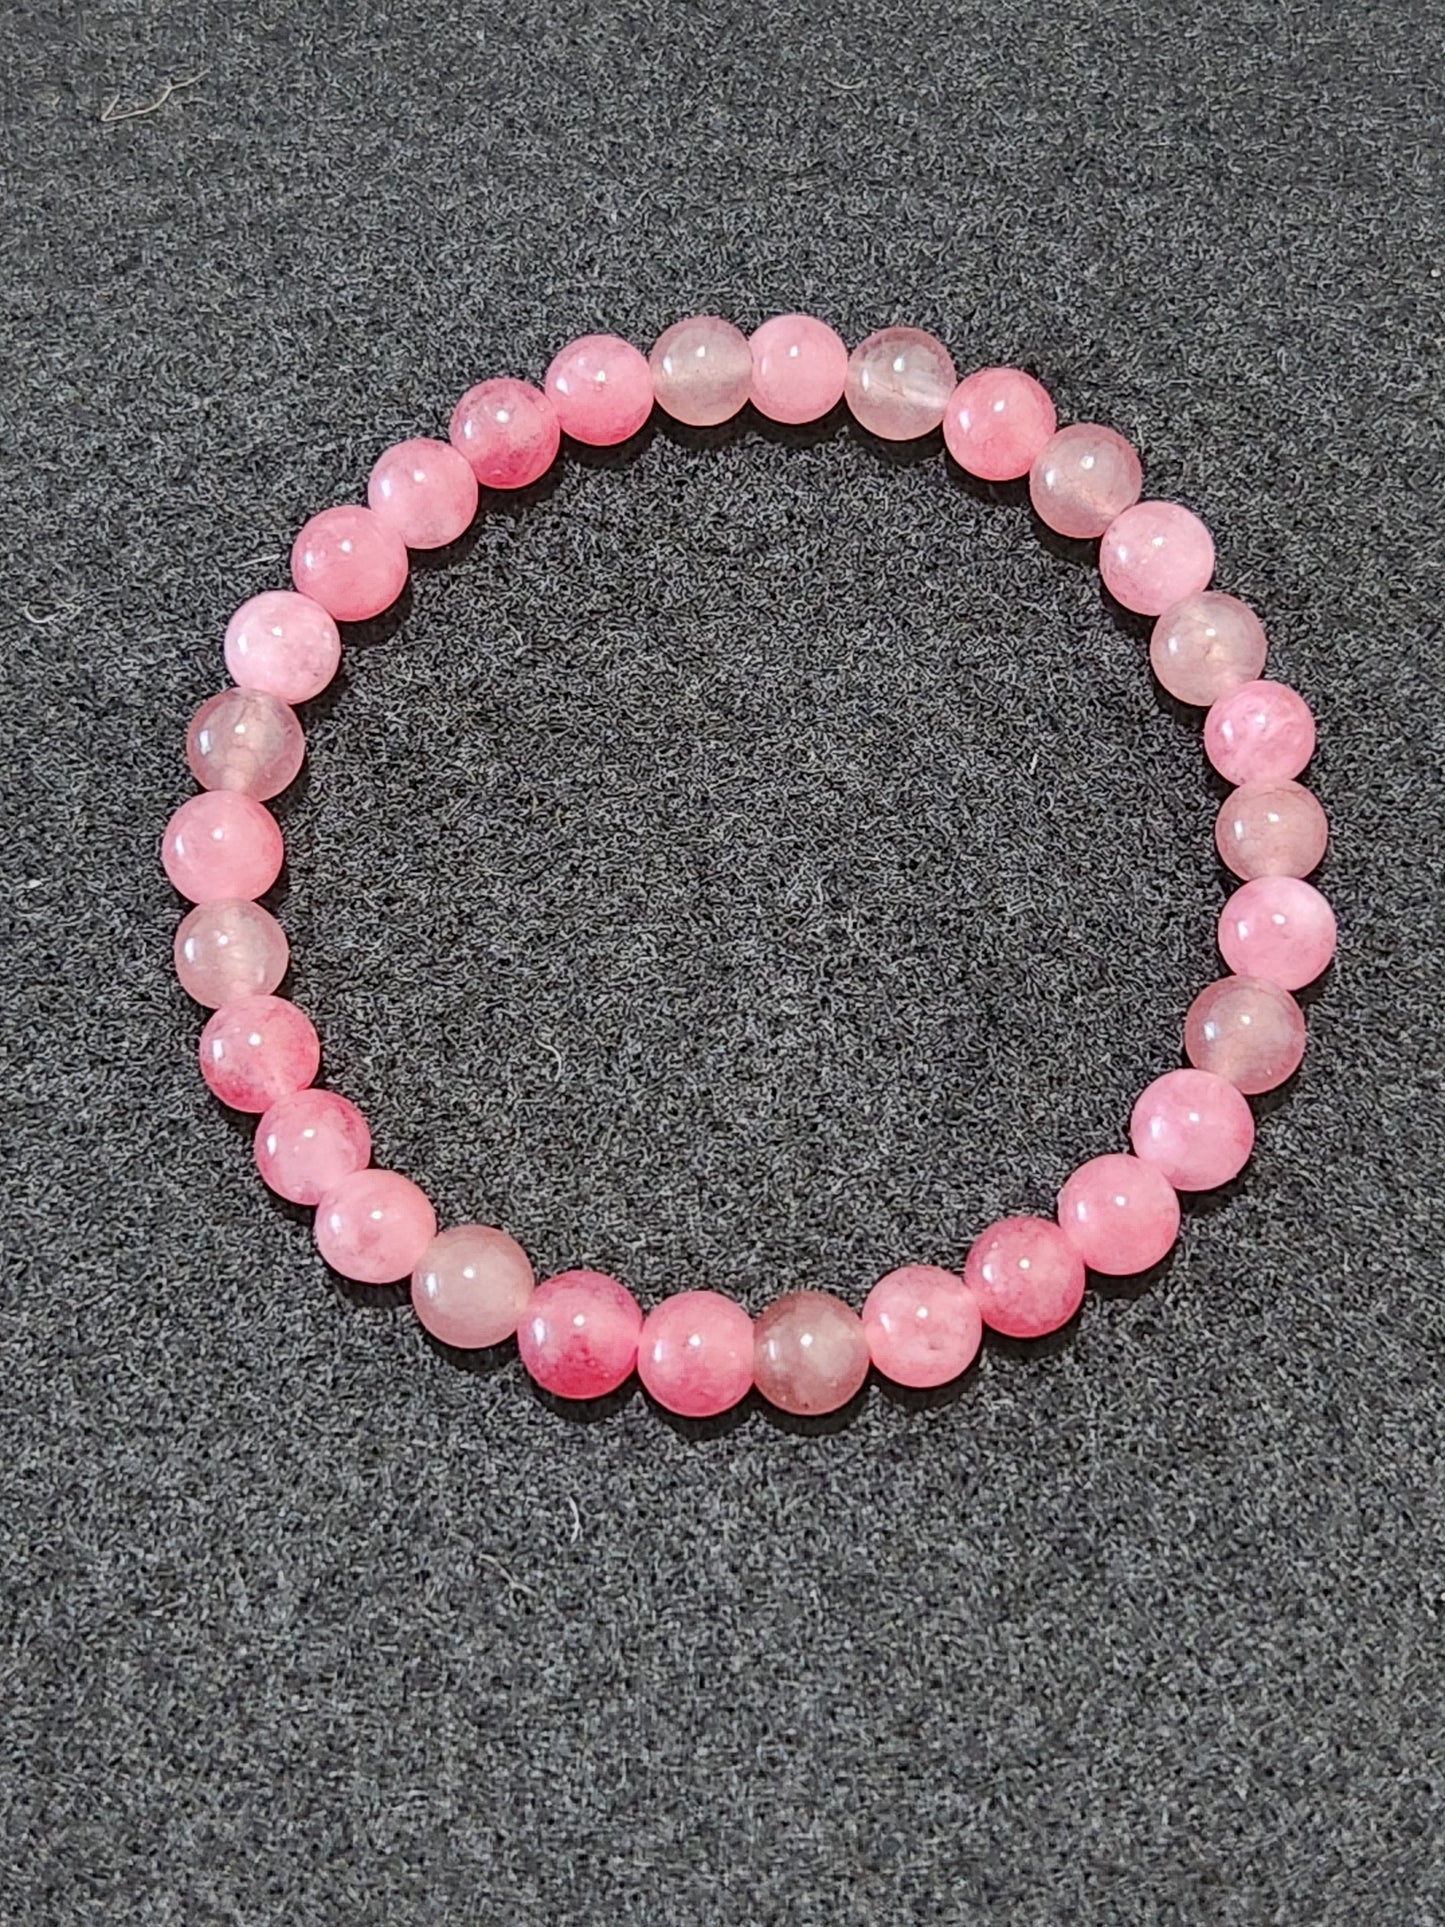 Strawberry Quartz Bracelet - love - passion - well being - unity - tranquility